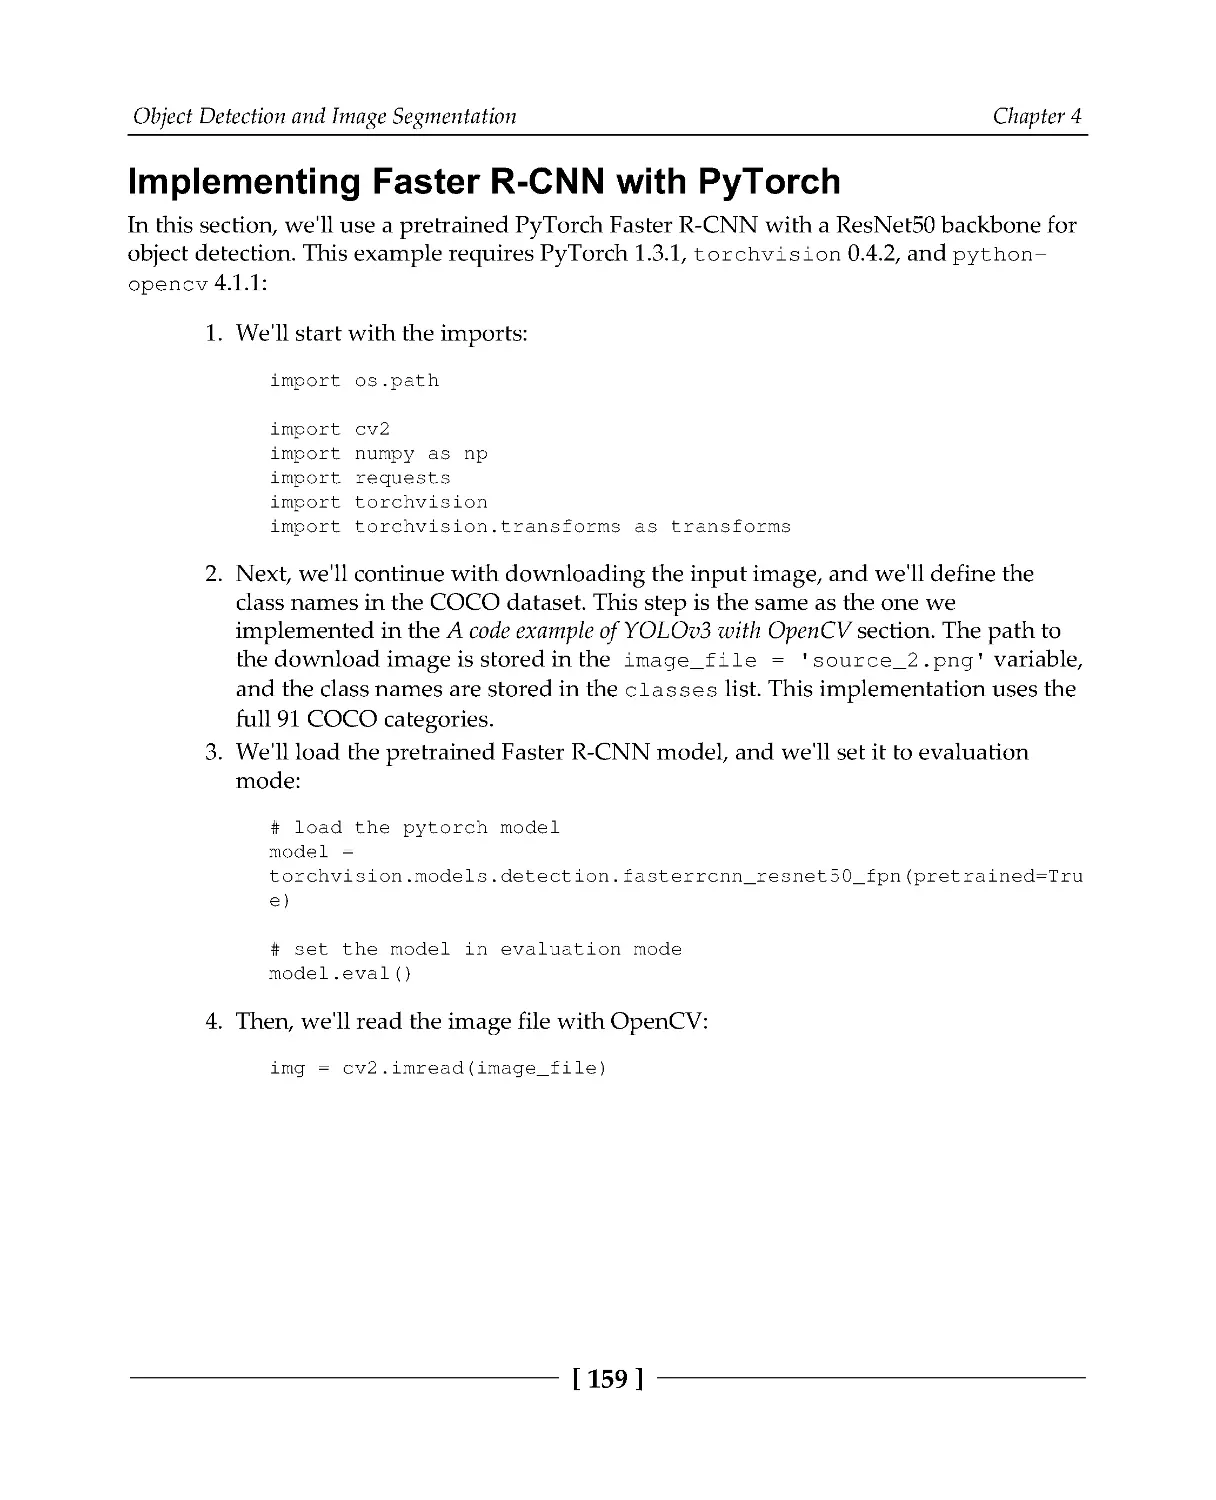 Implementing Faster R-CNN with PyTorch